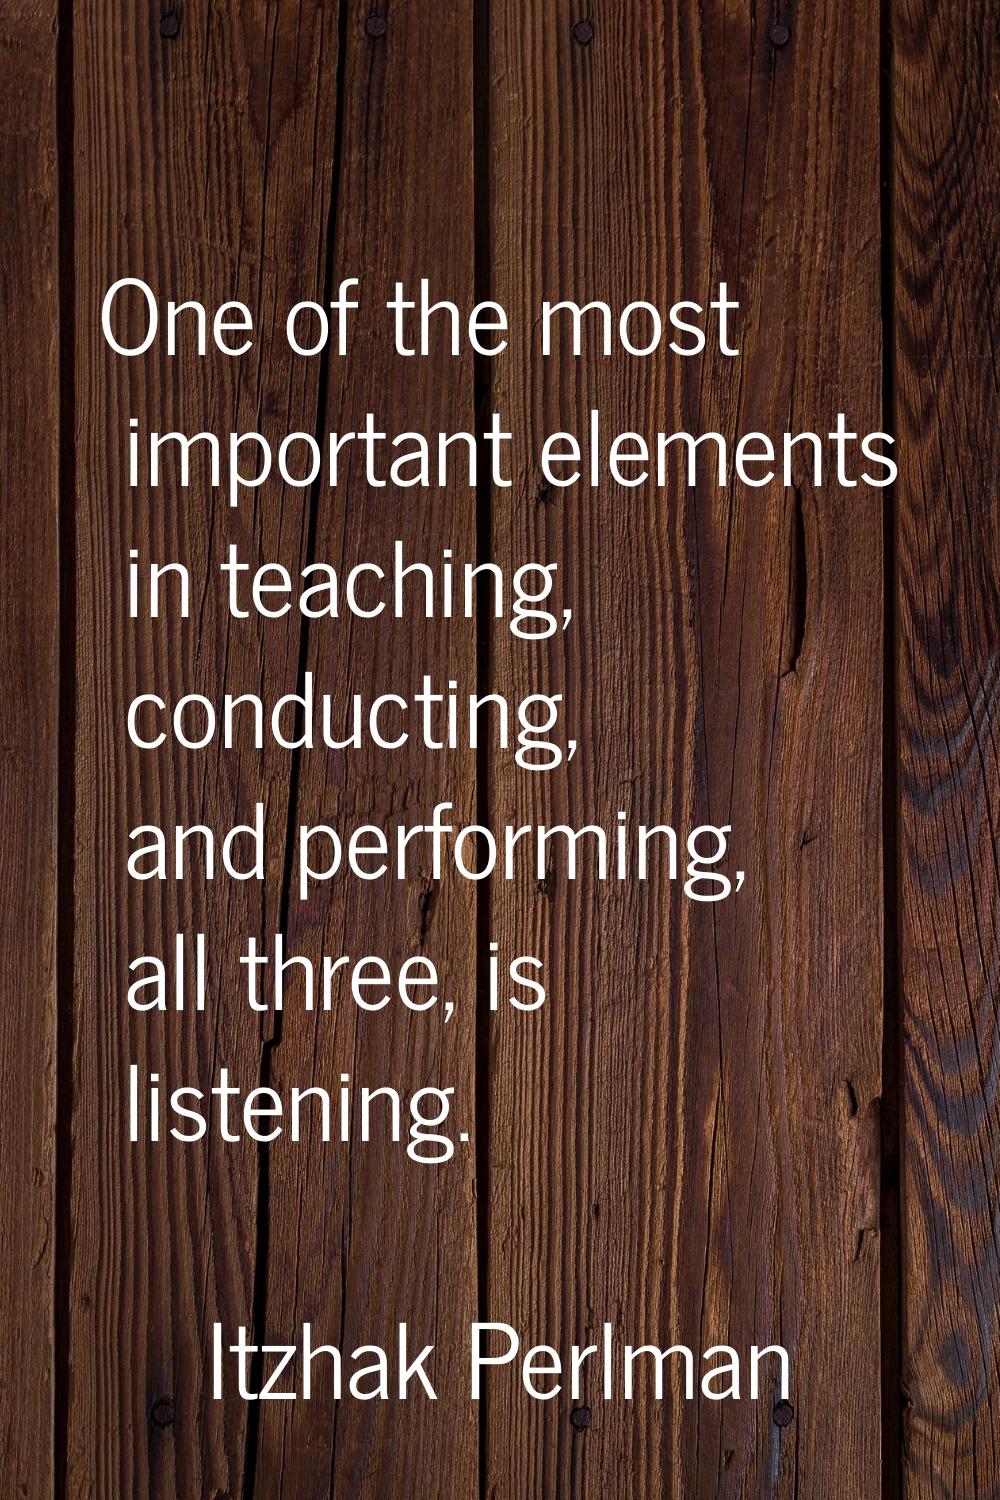 One of the most important elements in teaching, conducting, and performing, all three, is listening